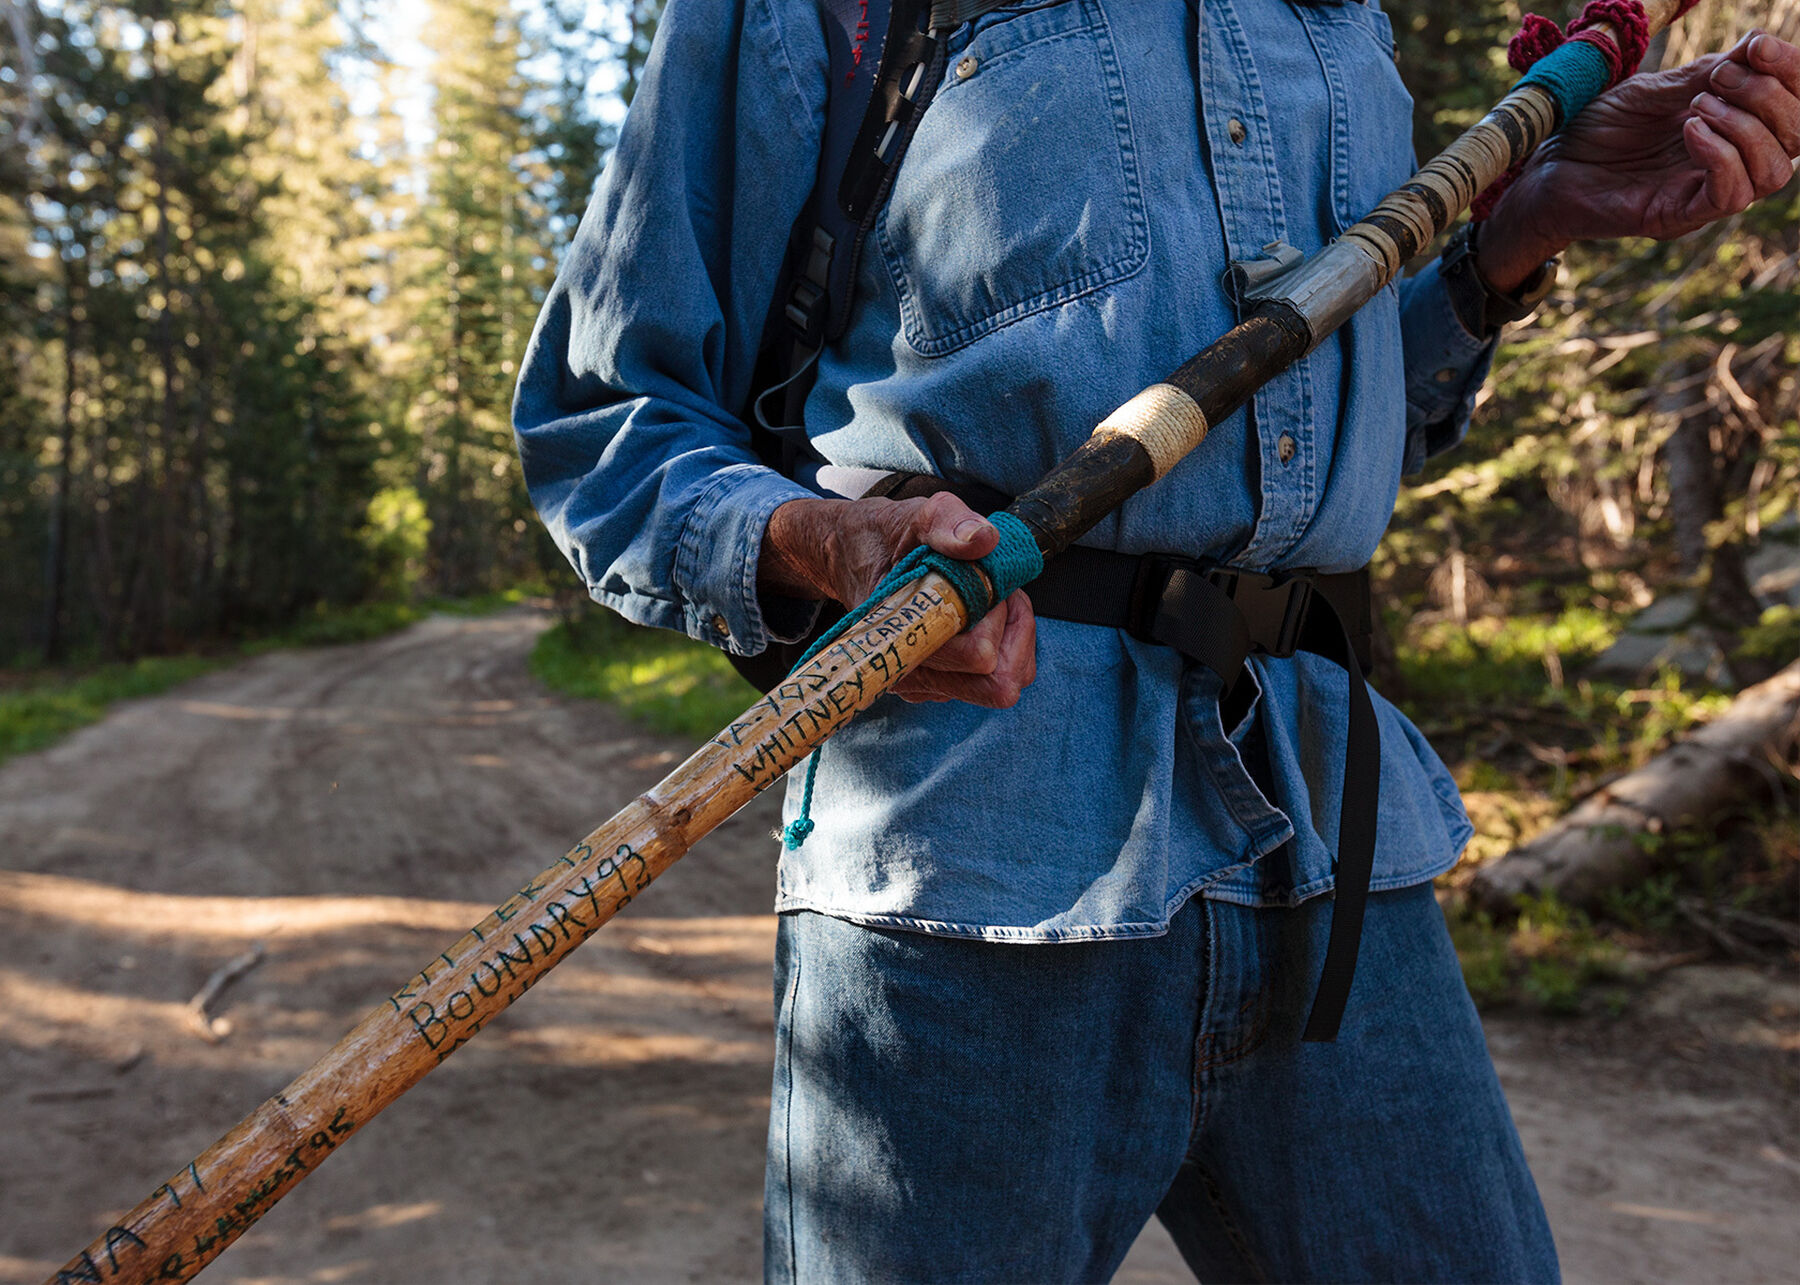 Bill standing on a trail holding up his hiking stick with carvings of peaks he has summited carved on the side